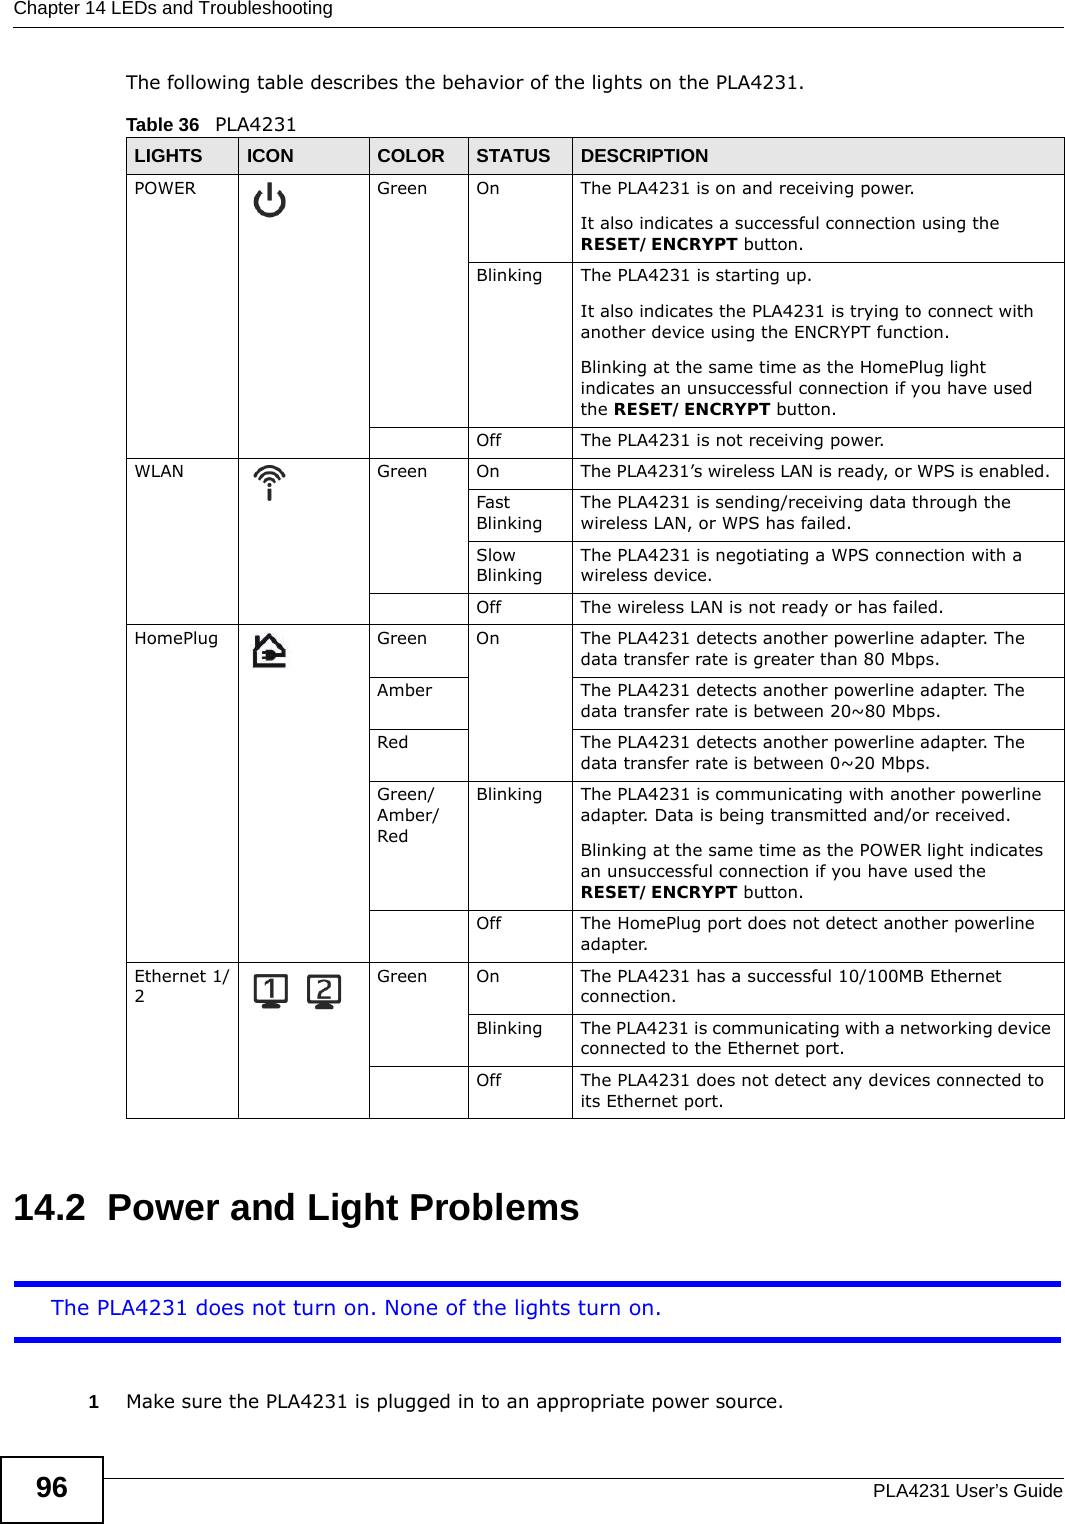 Chapter 14 LEDs and TroubleshootingPLA4231 User’s Guide96The following table describes the behavior of the lights on the PLA4231.14.2  Power and Light ProblemsThe PLA4231 does not turn on. None of the lights turn on.1Make sure the PLA4231 is plugged in to an appropriate power source. Table 36   PLA4231LIGHTS ICON COLOR STATUS DESCRIPTIONPOWER Green On The PLA4231 is on and receiving power.It also indicates a successful connection using the RESET/ENCRYPT button.Blinking The PLA4231 is starting up.It also indicates the PLA4231 is trying to connect with another device using the ENCRYPT function.Blinking at the same time as the HomePlug light indicates an unsuccessful connection if you have used the RESET/ENCRYPT button.Off The PLA4231 is not receiving power.WLAN Green On The PLA4231’s wireless LAN is ready, or WPS is enabled. Fast BlinkingThe PLA4231 is sending/receiving data through the wireless LAN, or WPS has failed.Slow BlinkingThe PLA4231 is negotiating a WPS connection with a wireless device.Off The wireless LAN is not ready or has failed. HomePlug Green On The PLA4231 detects another powerline adapter. The data transfer rate is greater than 80 Mbps.Amber The PLA4231 detects another powerline adapter. The data transfer rate is between 20~80 Mbps.Red The PLA4231 detects another powerline adapter. The data transfer rate is between 0~20 Mbps.Green/ Amber/RedBlinking The PLA4231 is communicating with another powerline adapter. Data is being transmitted and/or received.Blinking at the same time as the POWER light indicates an unsuccessful connection if you have used the RESET/ENCRYPT button.Off The HomePlug port does not detect another powerline adapter.Ethernet 1/2Green On The PLA4231 has a successful 10/100MB Ethernet connection. Blinking The PLA4231 is communicating with a networking device connected to the Ethernet port.Off The PLA4231 does not detect any devices connected to its Ethernet port.